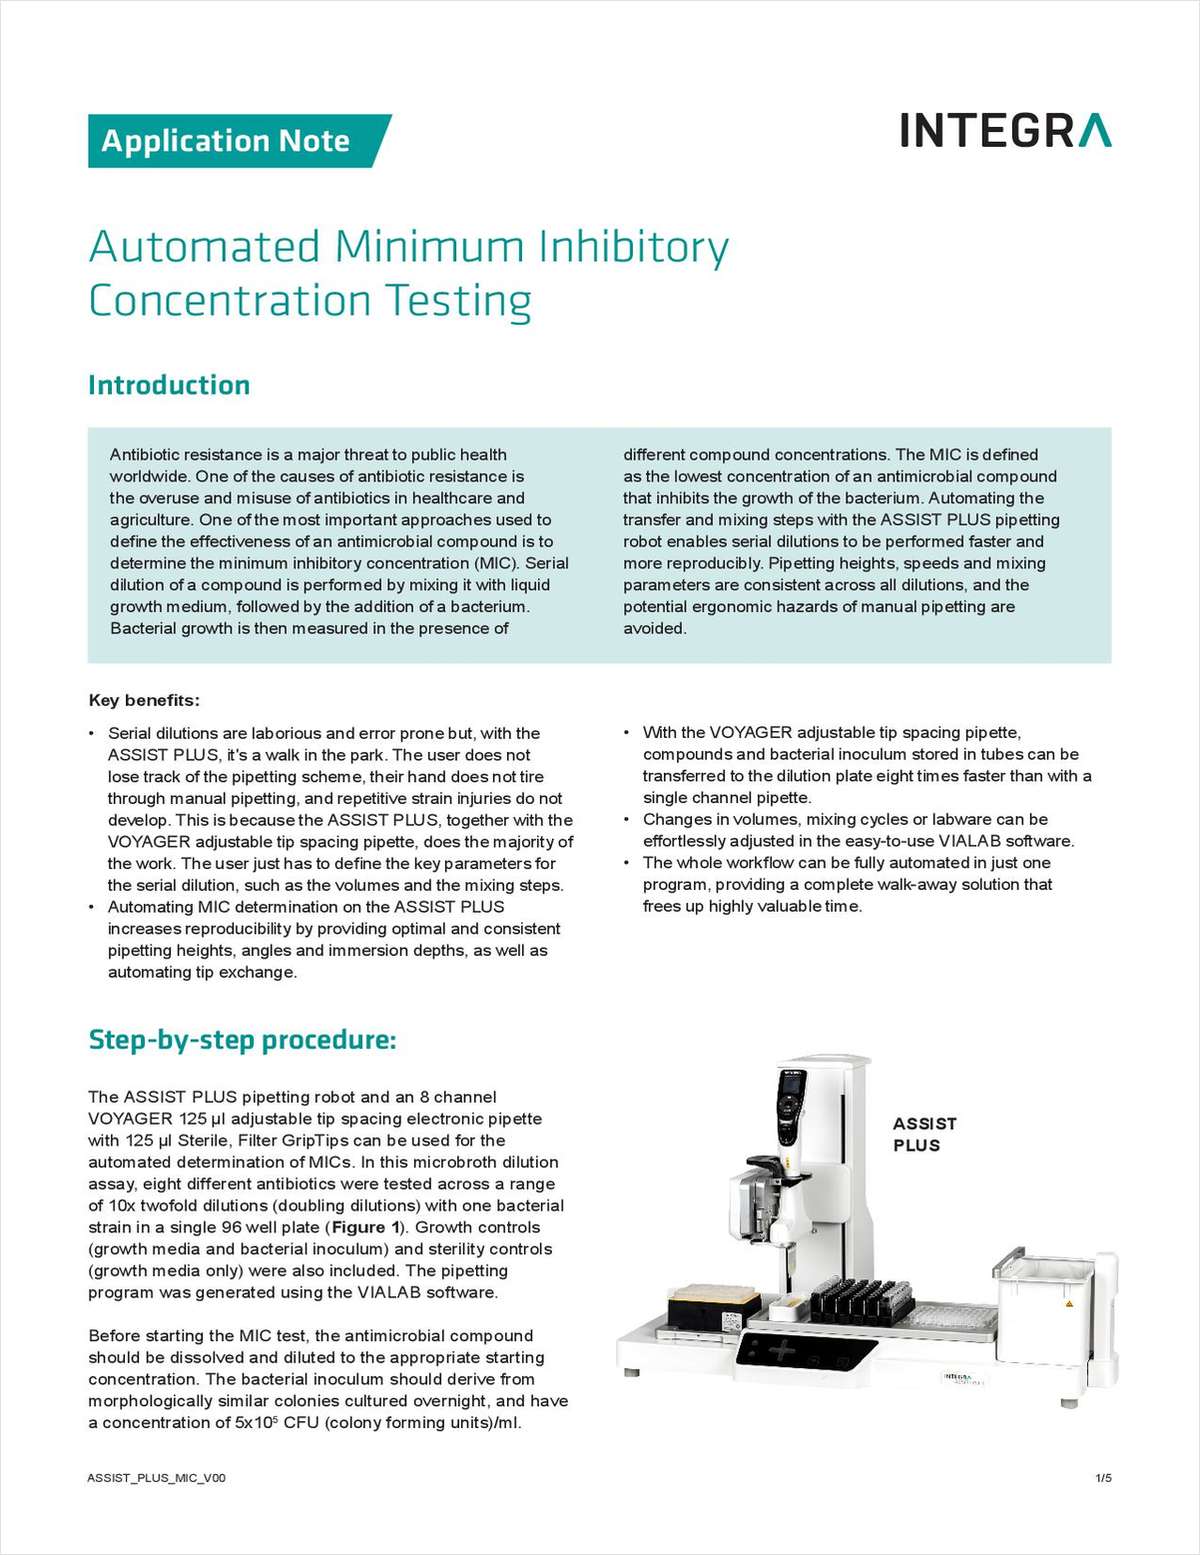 Automated Minimum Inhibitory Concentration Testing